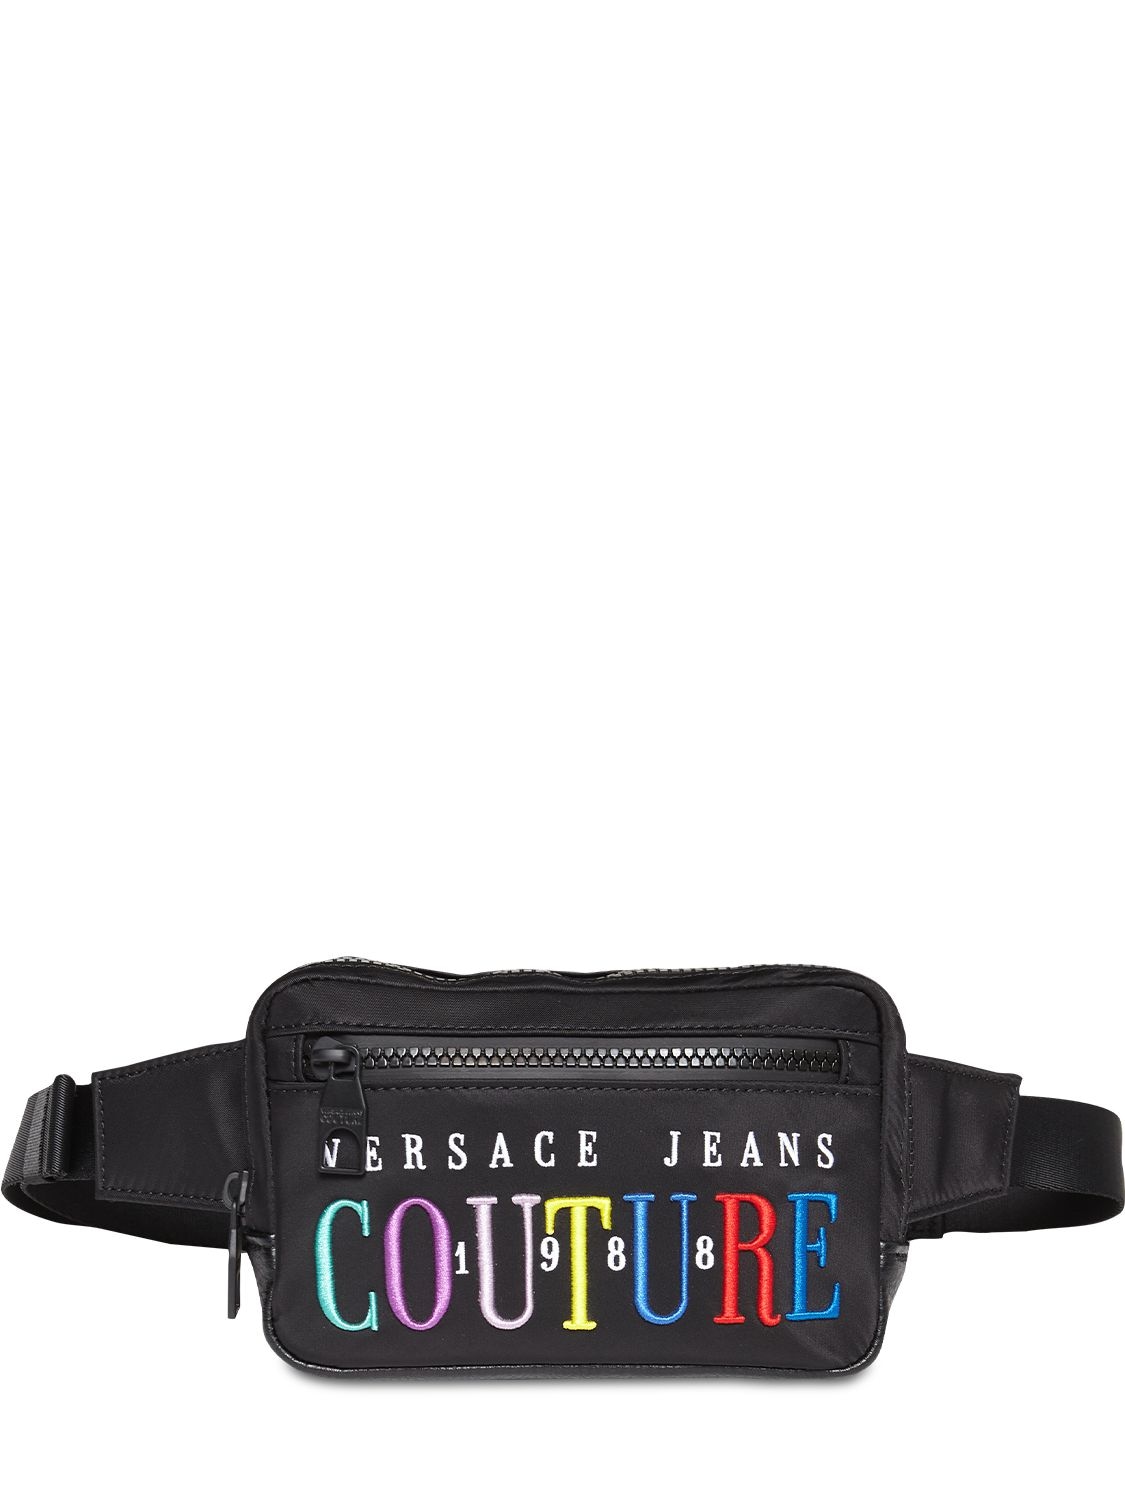 Versace Jeans Couture Multicolor Embroidered Logo Belt Bag In Nero